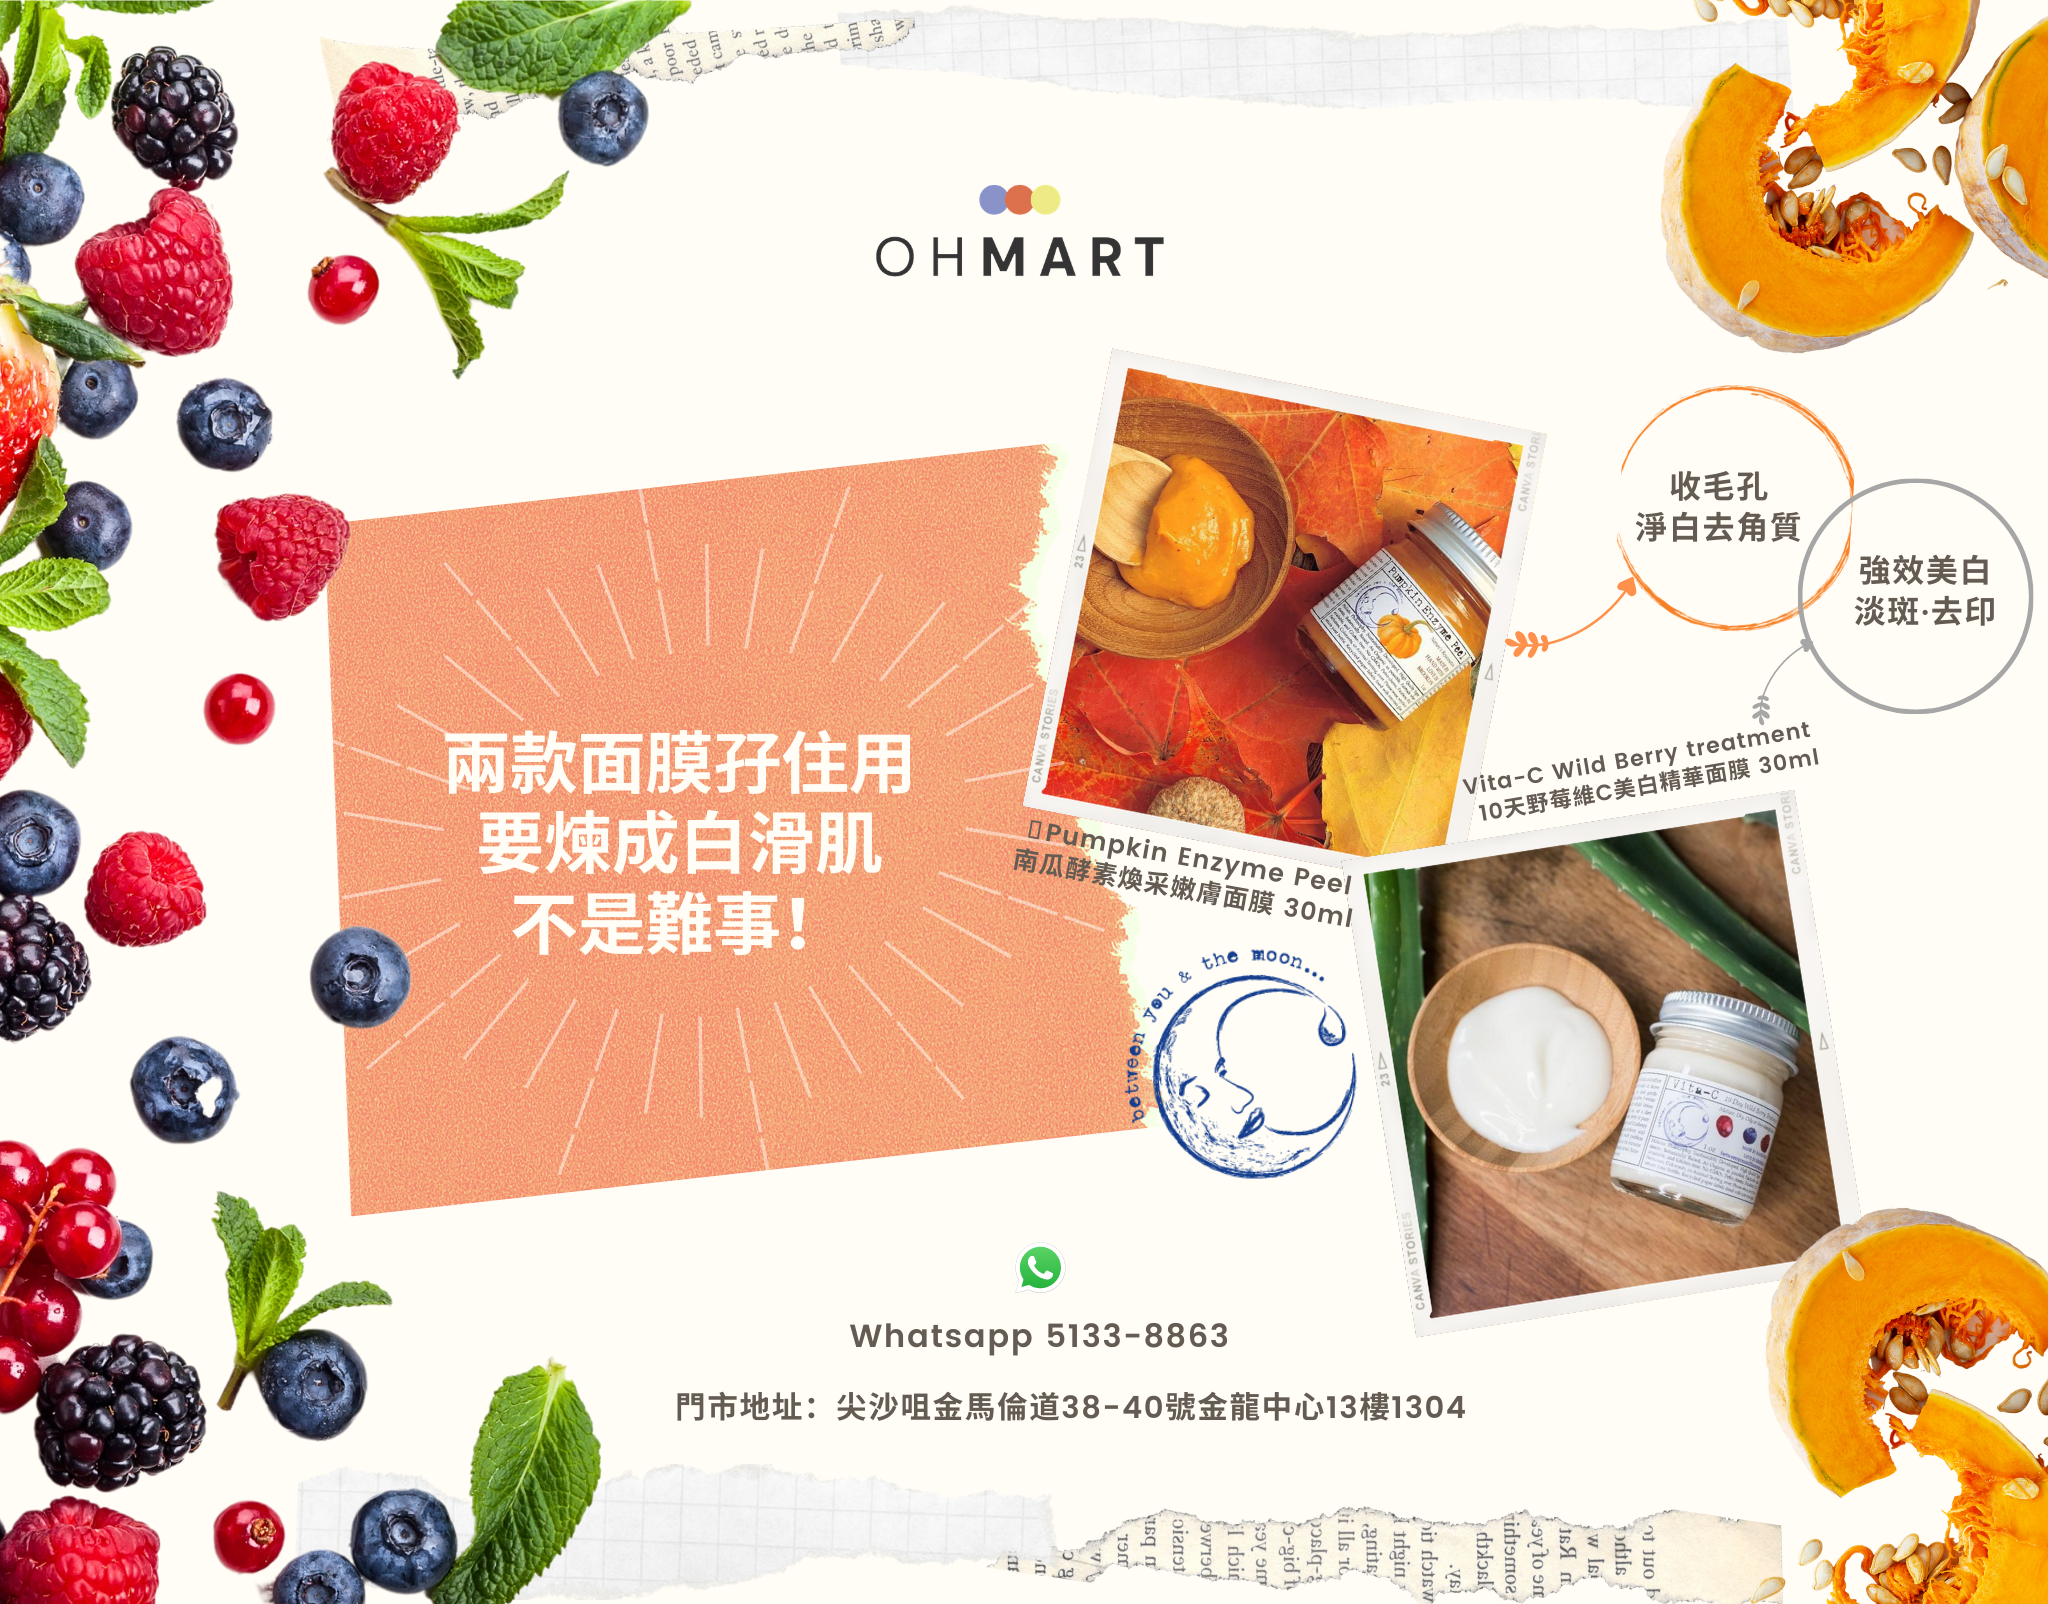 OhMart Beauty, Fashion, Lifestyle, Organic Skincare, Natural Makeup - Curated by OhMart 2